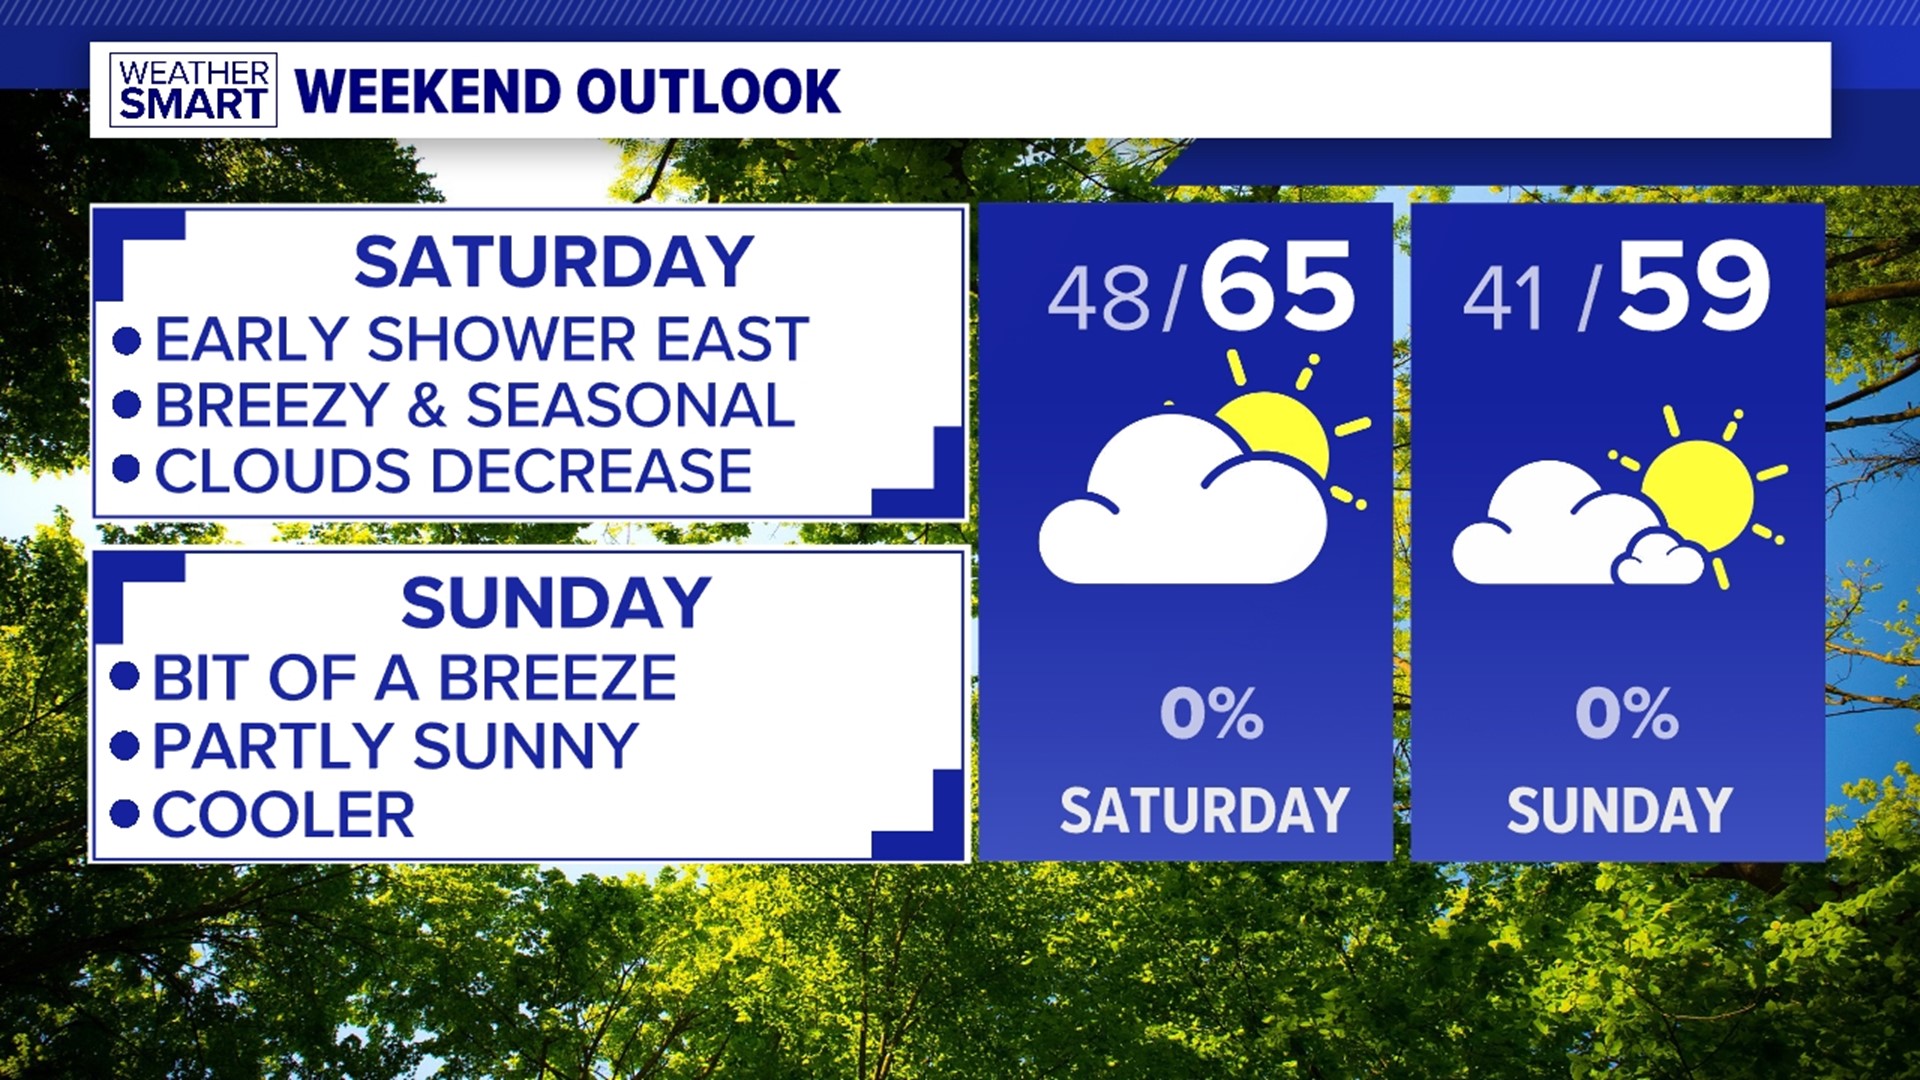 After a gloomy end to the weekend, things are looking up for the weekend. Drier air moves in, with a mix of sun and clouds both Saturday and Sunday!